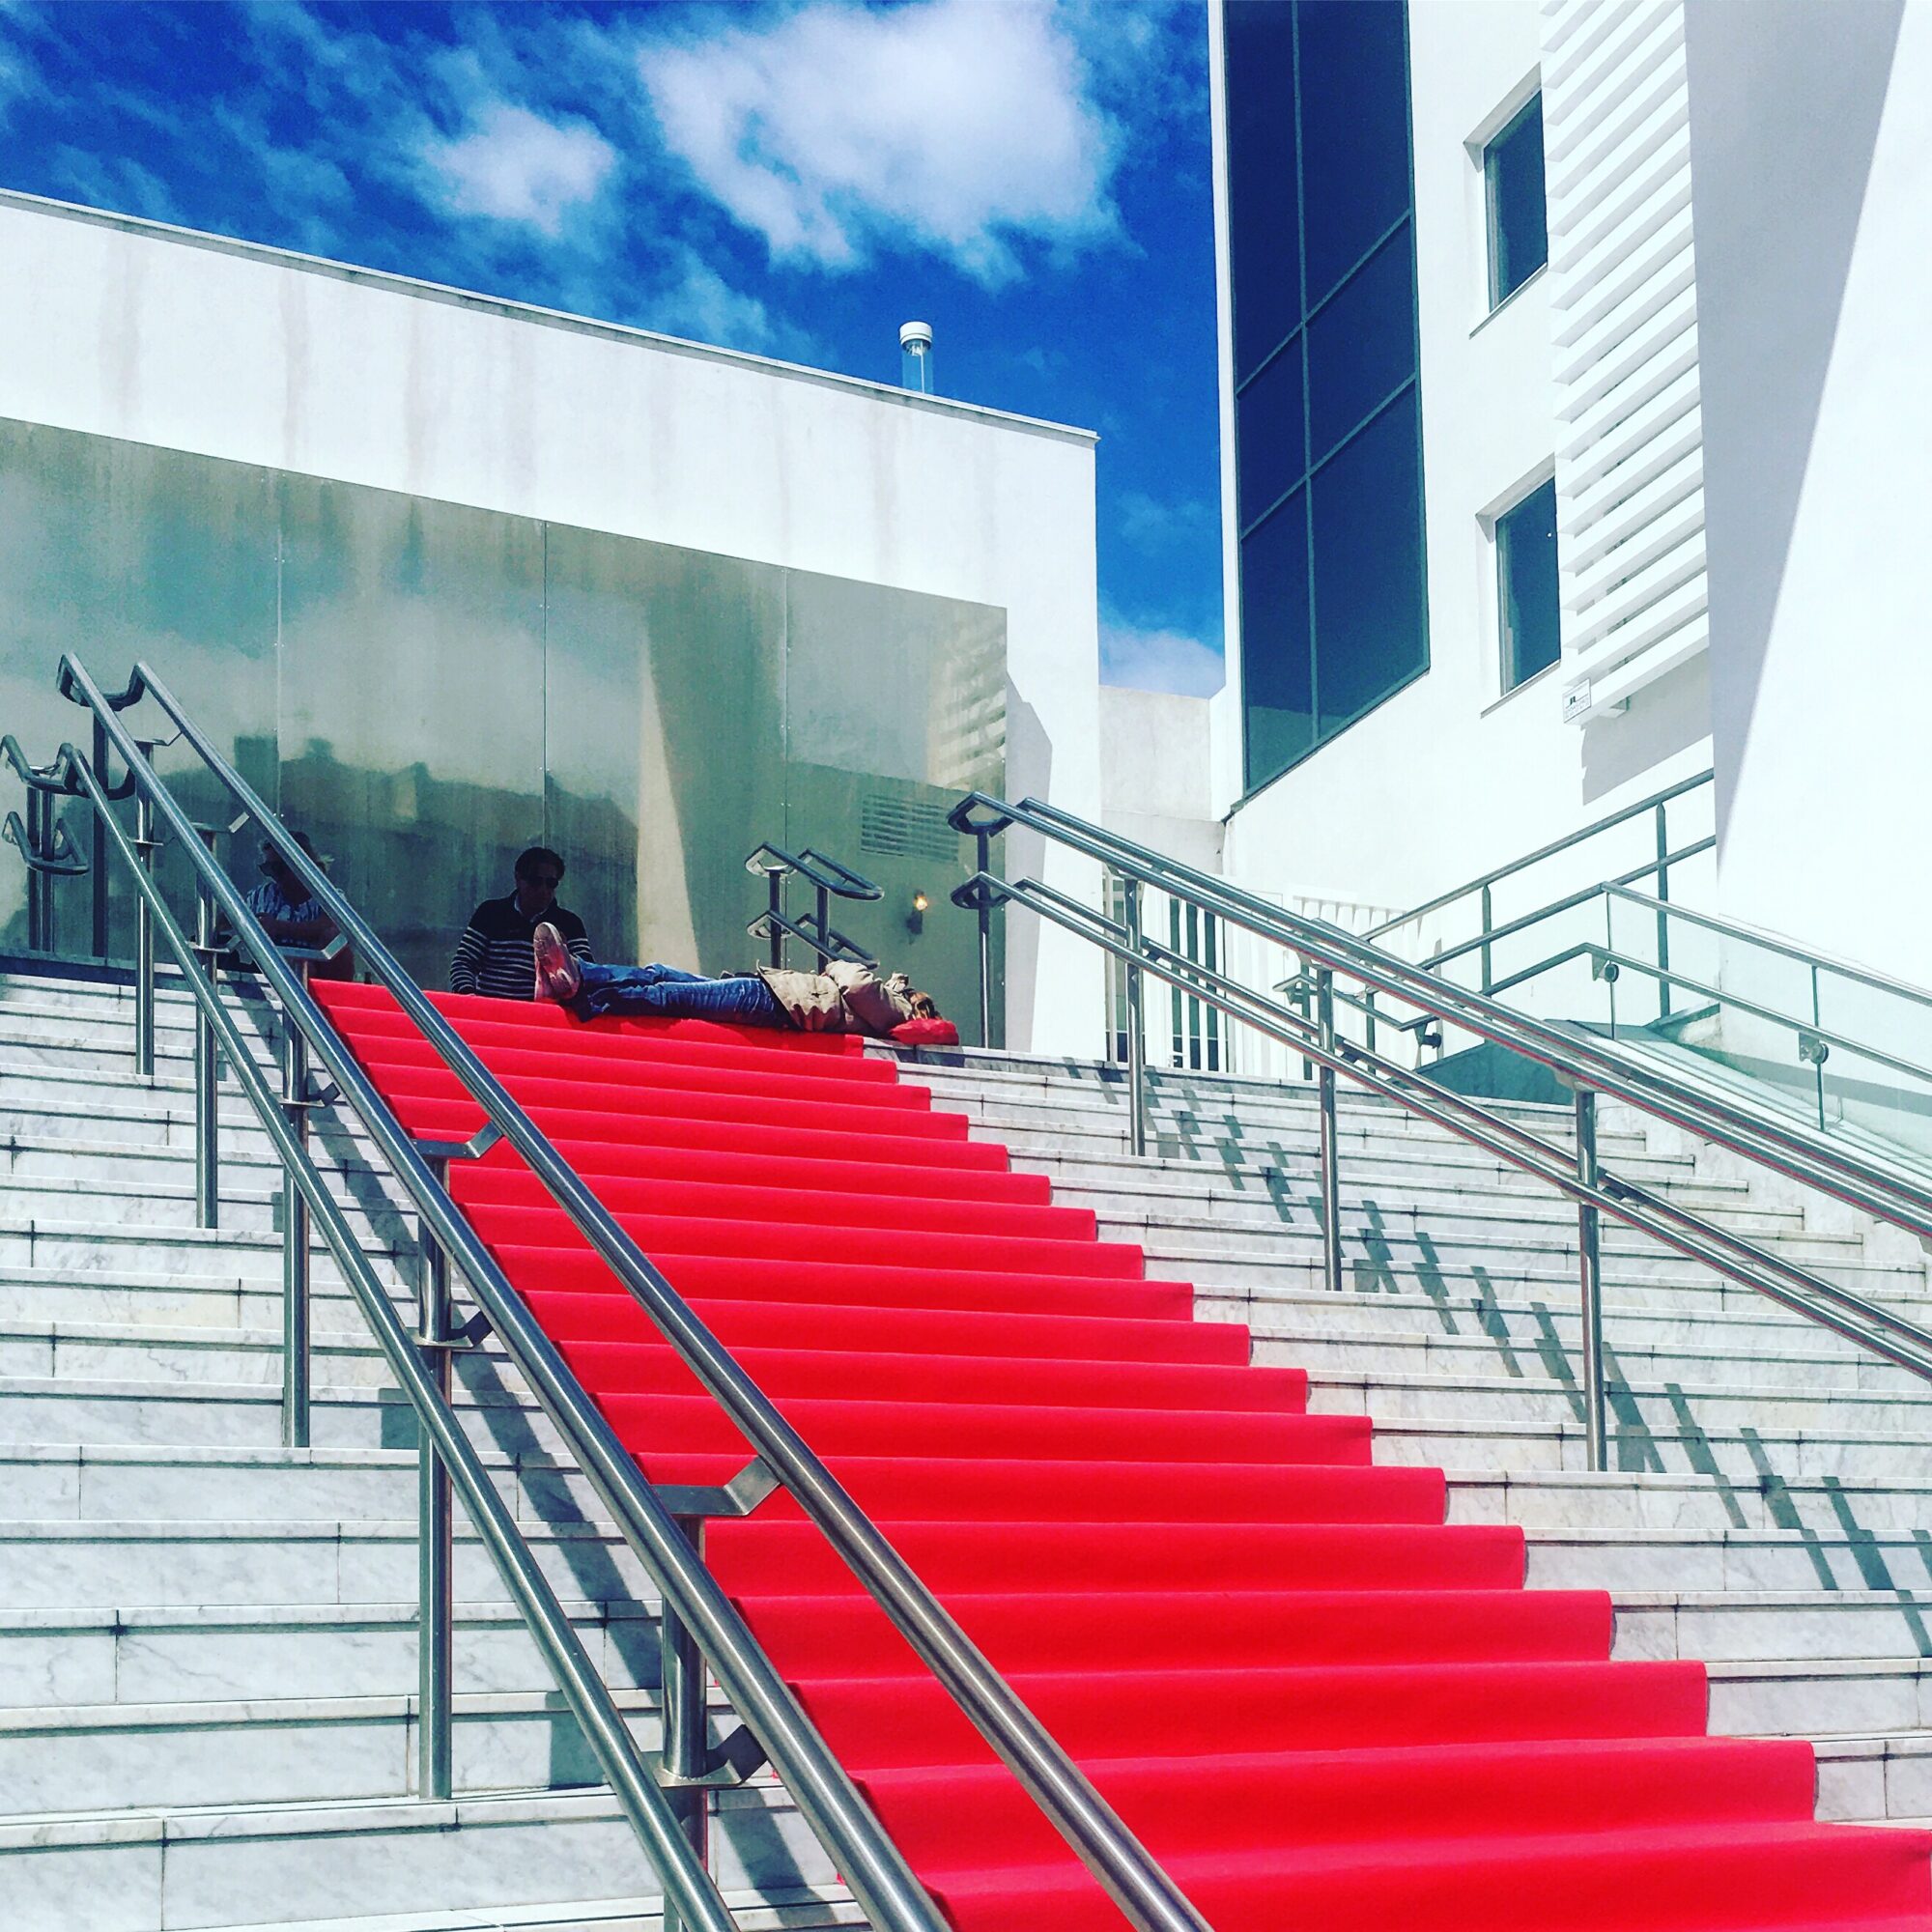 Red Carpet at the train station in Cannes during the Cannes Film Festival / Photo by Kristina Moskalenko